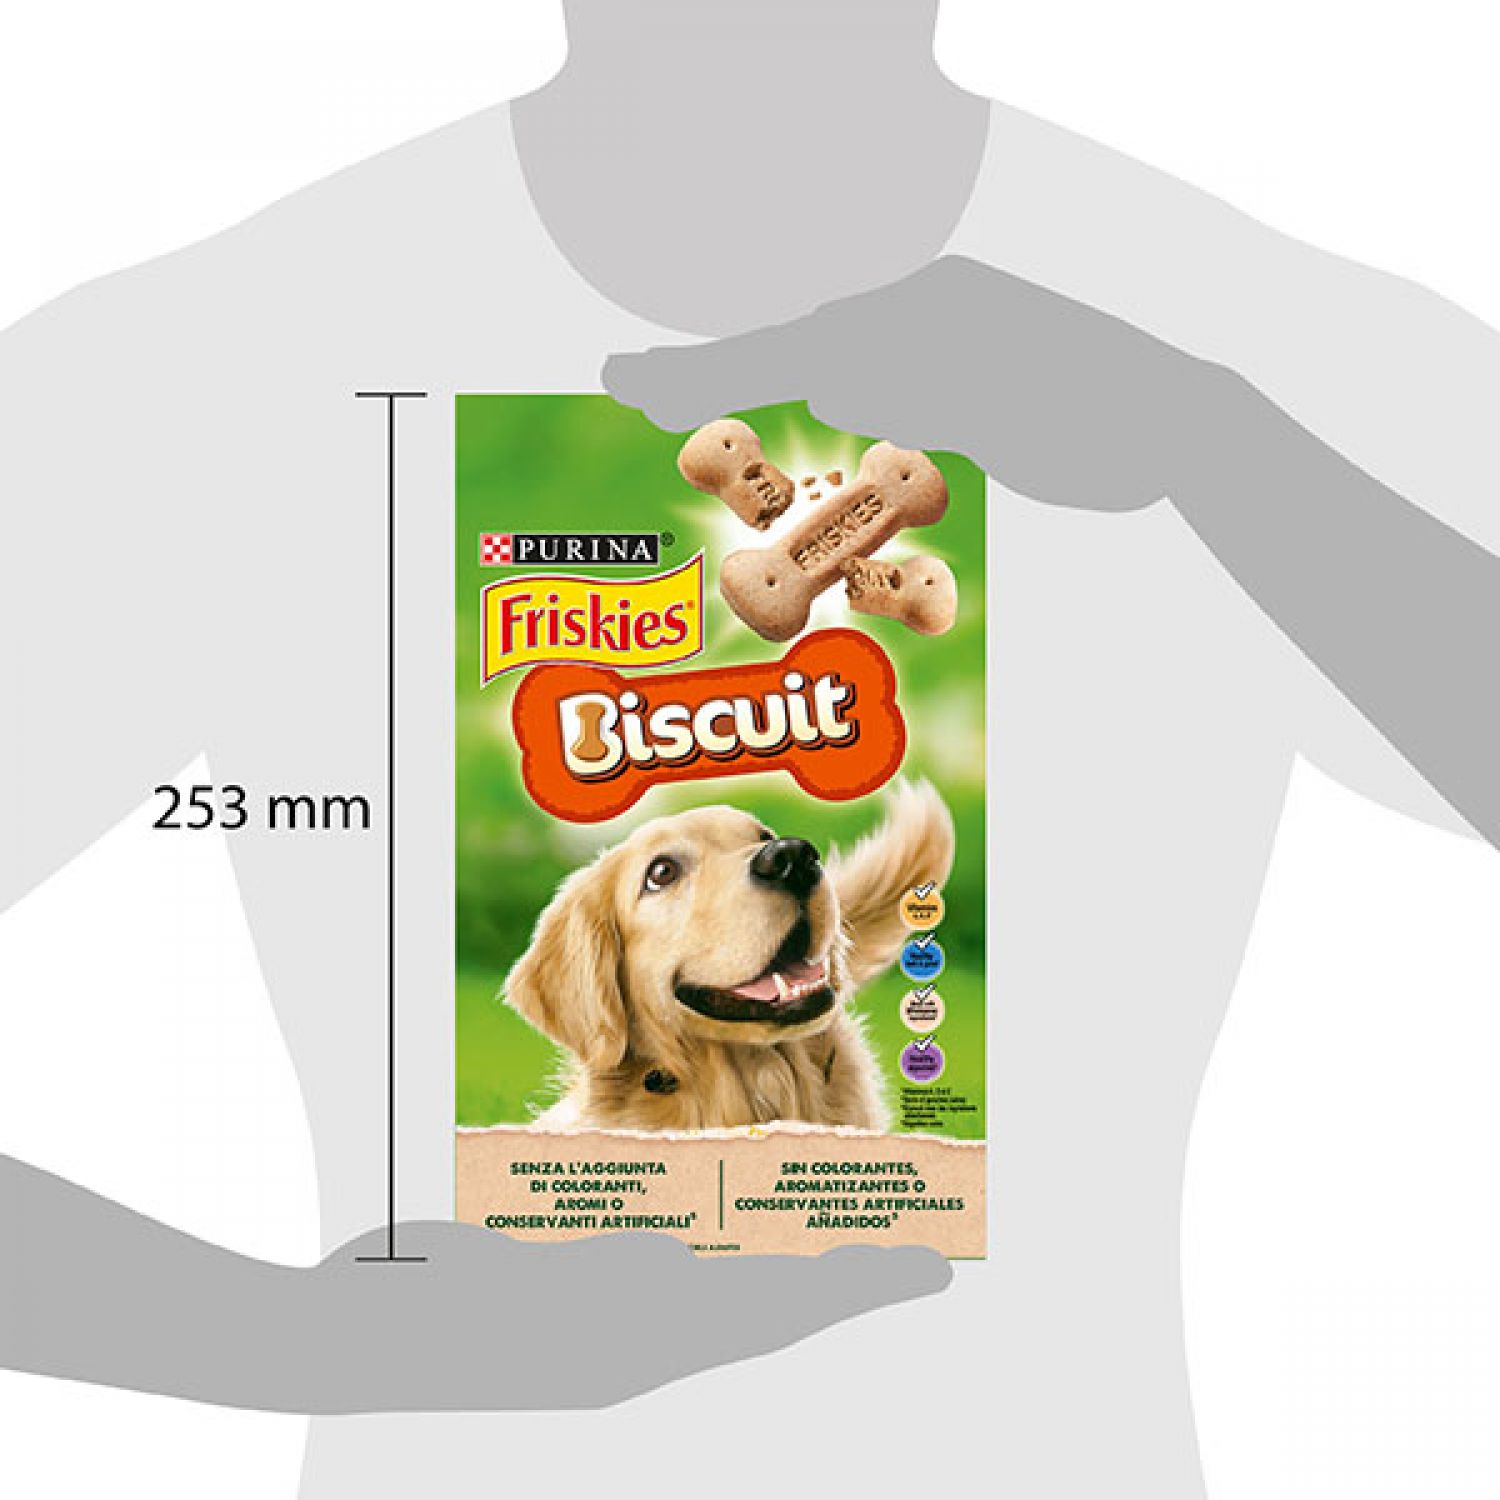 PURINA Friskies - Biscuit Snack Cane 650 g - Agrizoo 2